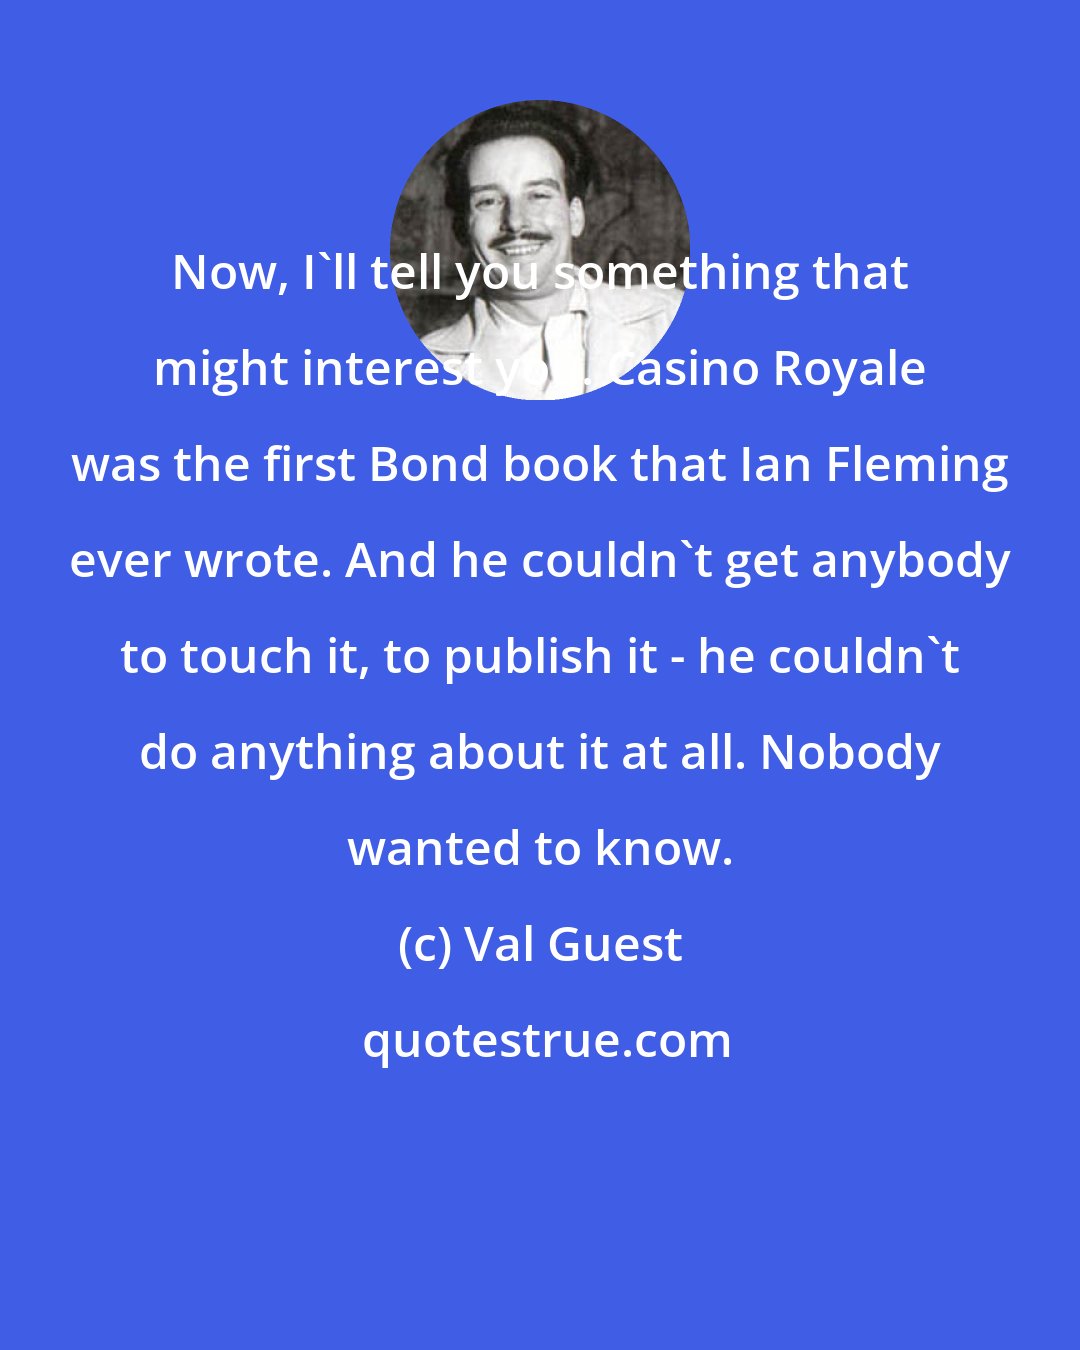 Val Guest: Now, I'll tell you something that might interest you. Casino Royale was the first Bond book that Ian Fleming ever wrote. And he couldn't get anybody to touch it, to publish it - he couldn't do anything about it at all. Nobody wanted to know.